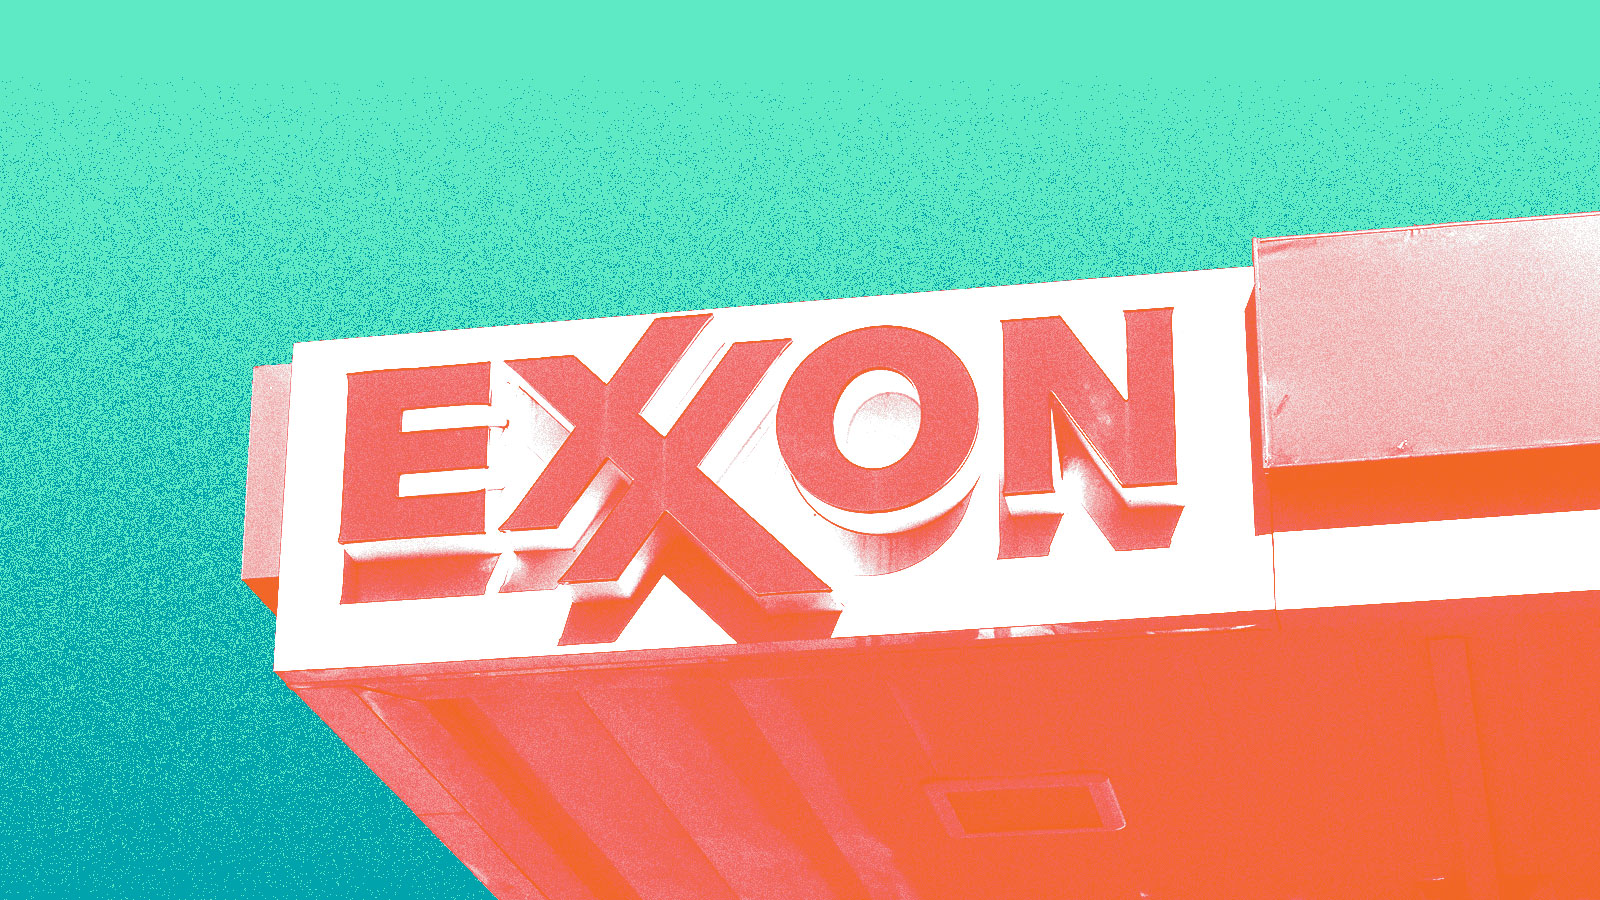 Exxonmobil sign against a teal background